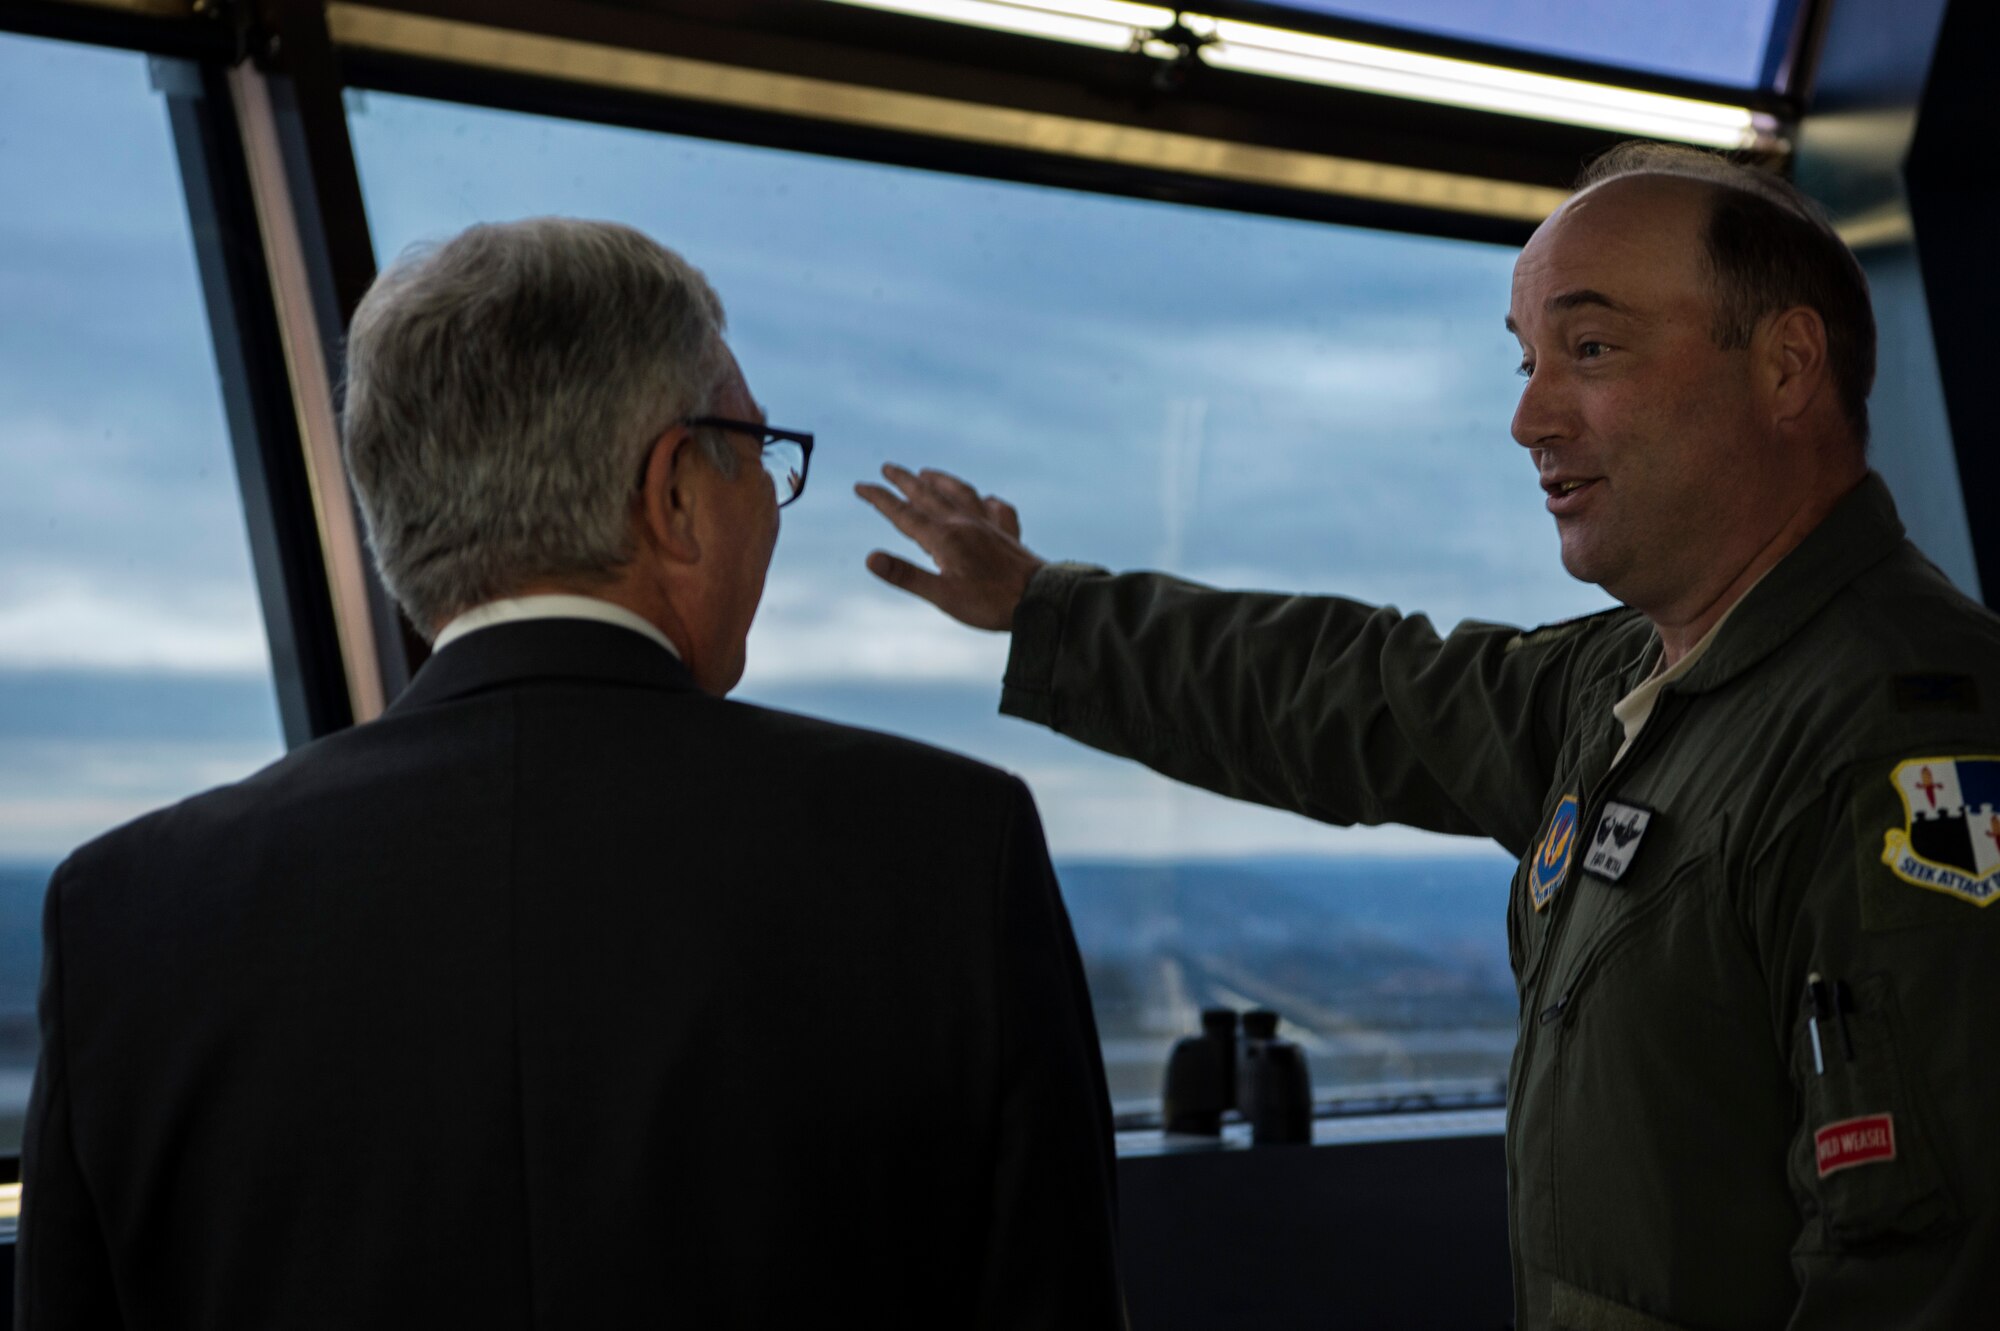 U.S. Air Force Col. Anthony Retka, 52nd Operations Group commander, right, speaks with Roger Lewentz, Minister of the Interior of Rhineland-Palatinate, Germany, left, about aircraft flying schedules in the aircraft control tower at Spangdahlem Air Base, Germany, Oct. 22, 2018. The 52nd Fighter Wing's command team gave Lewentz a base tour to provide him a better understanding of the wing's operations. (U.S. Air Force photo by Airman 1st Class Valerie Seelye)